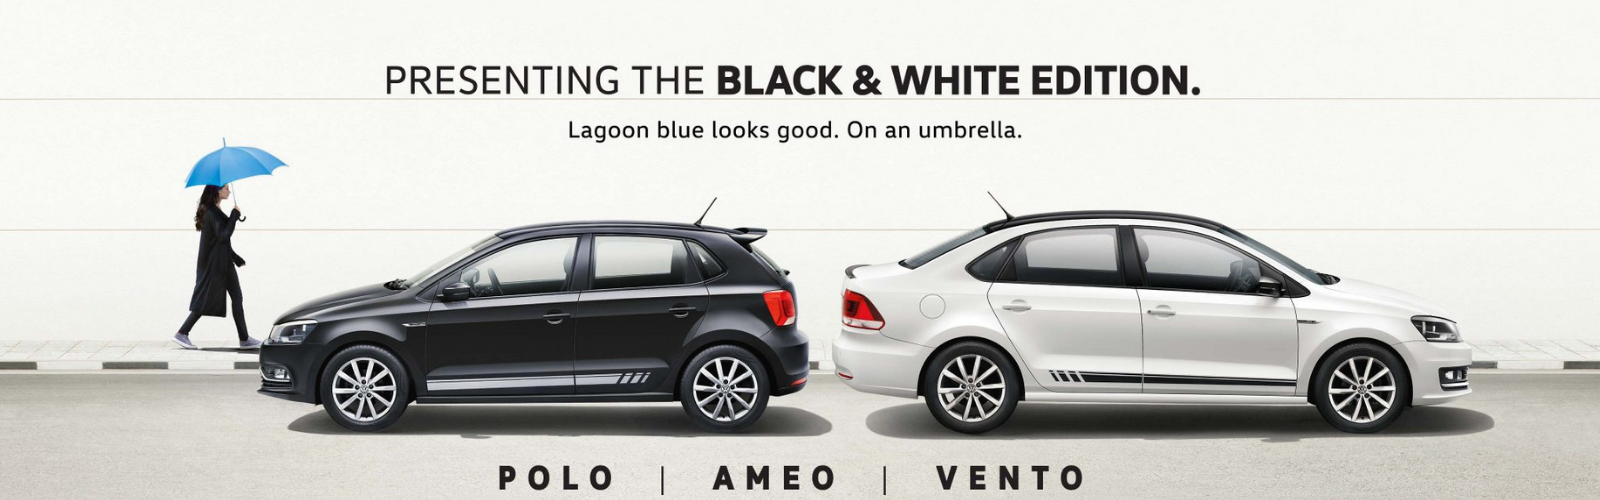 Volkswagen Polo, Ameo, Vento Black & White Special Edition Launched - Volkswagen Mumbai